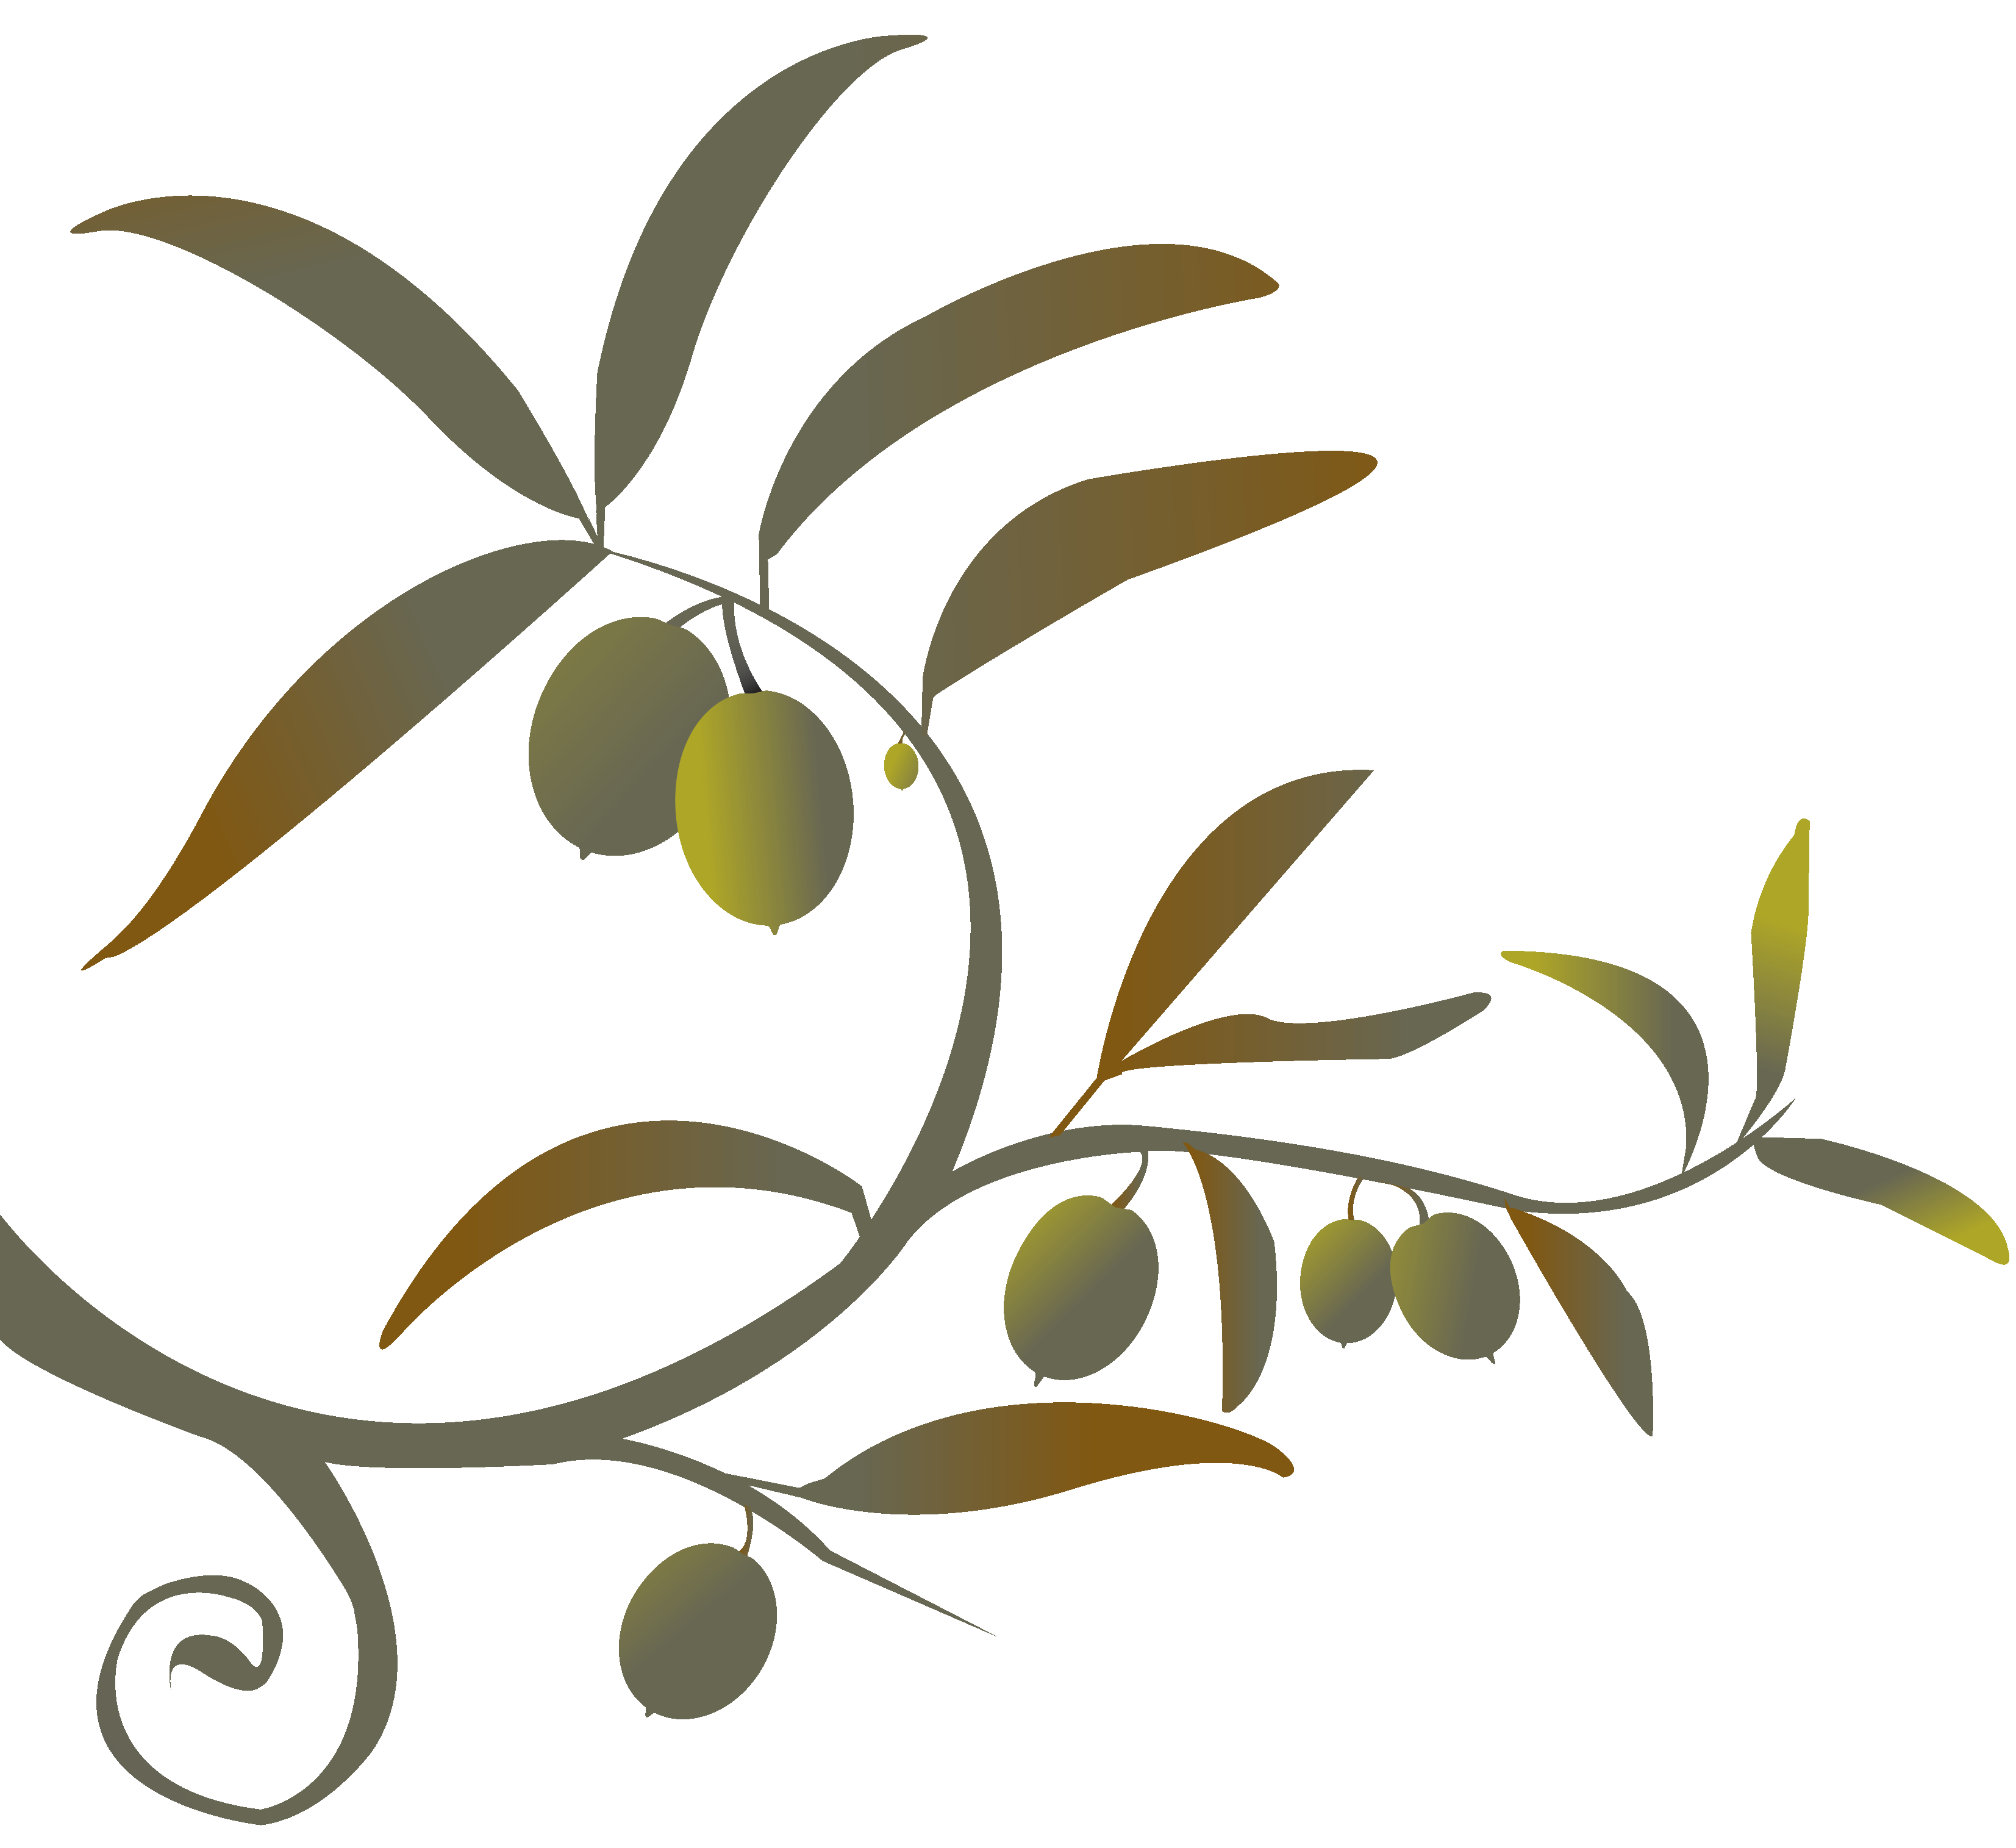 The Online Olive